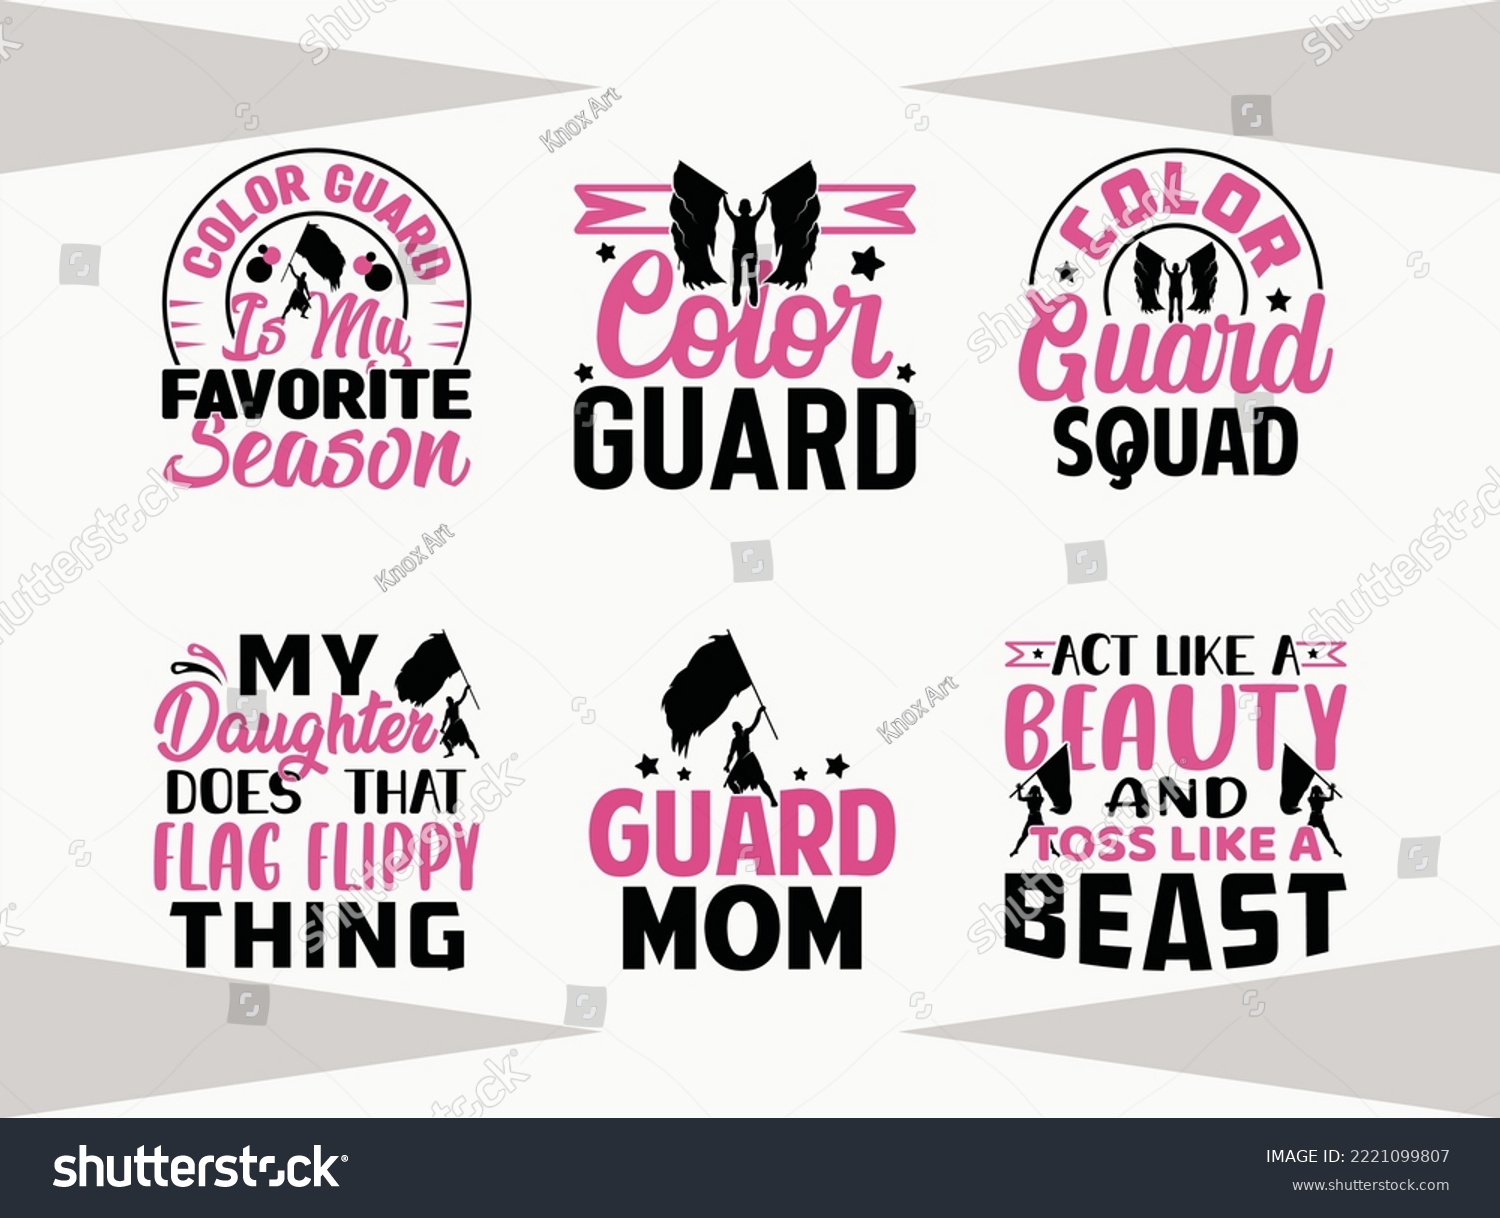 SVG of Color Guard Cut File, Color Guard Squad, Guard Mom, Color Guard Is My Favorite Season, Act Like A Beauty And Toss Like A Beast, My Daughter Does That Flag Flippy Thing svg